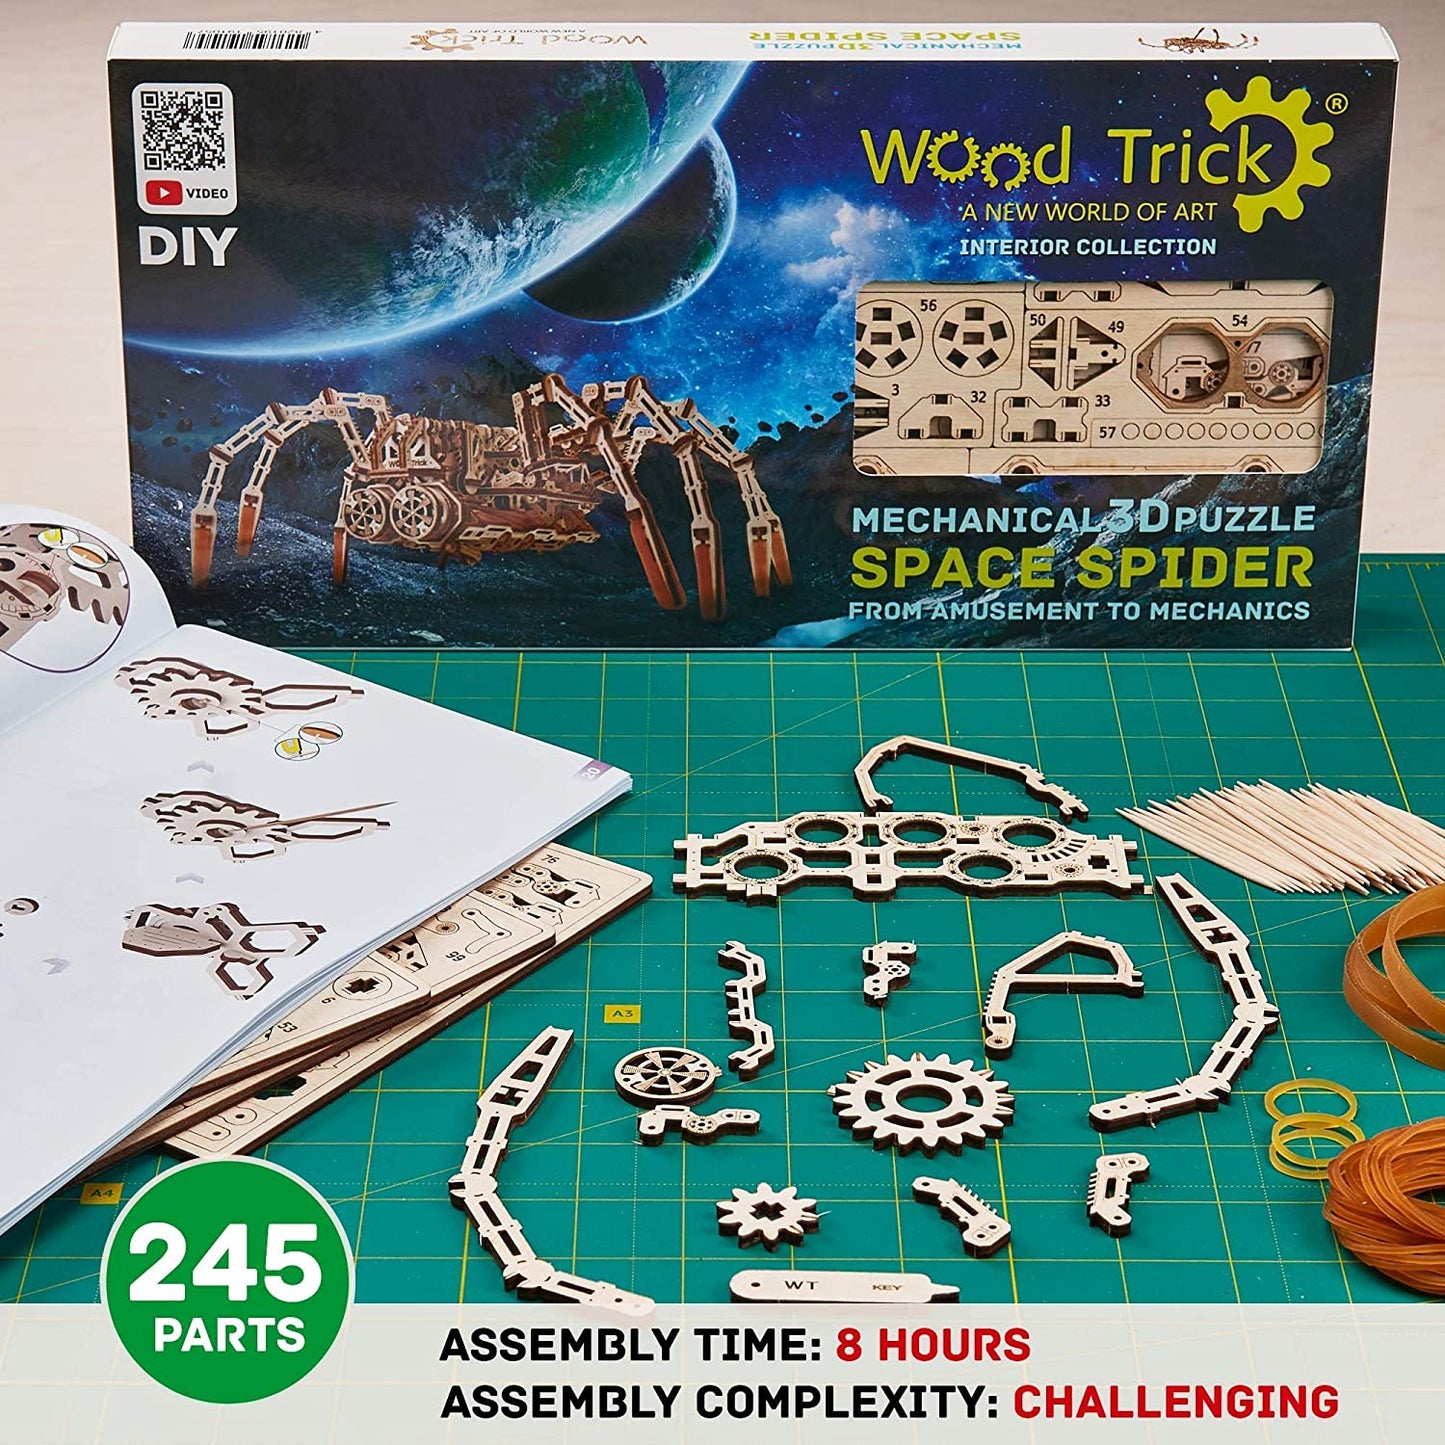 The packaging and contents for a 3D wooden spider puzzle which can be assembled.